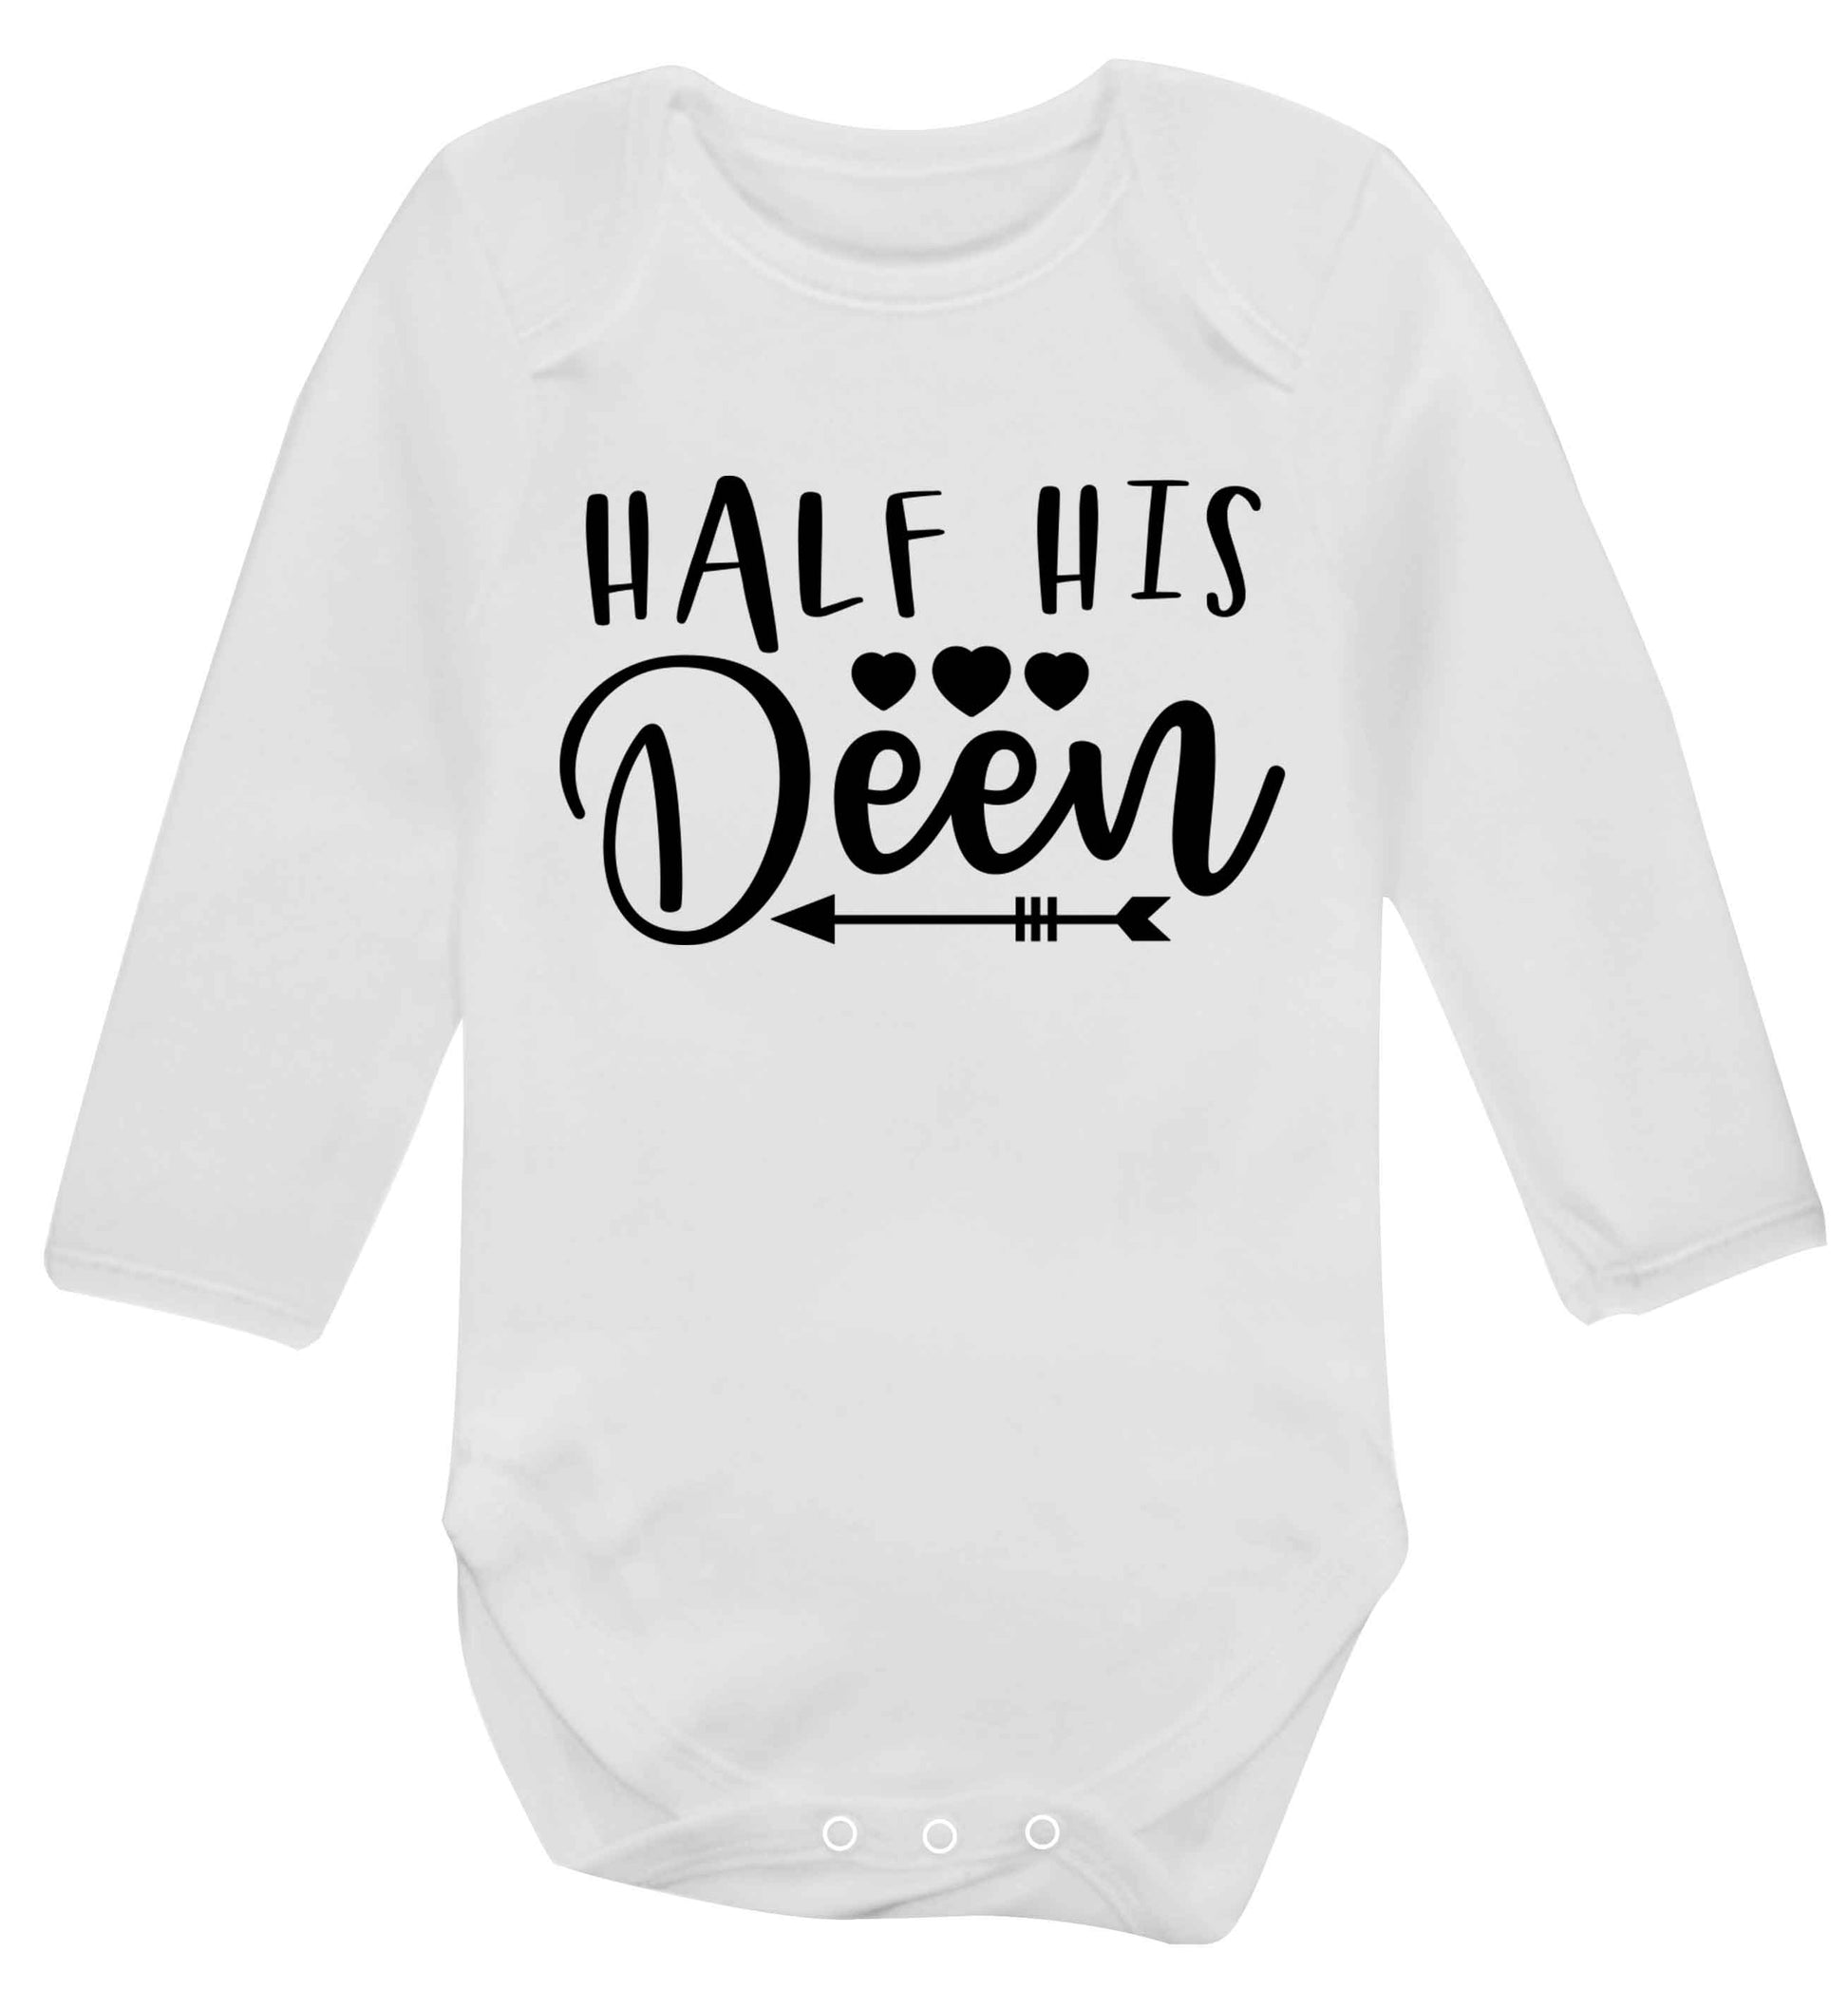 Half his deen Baby Vest long sleeved white 6-12 months